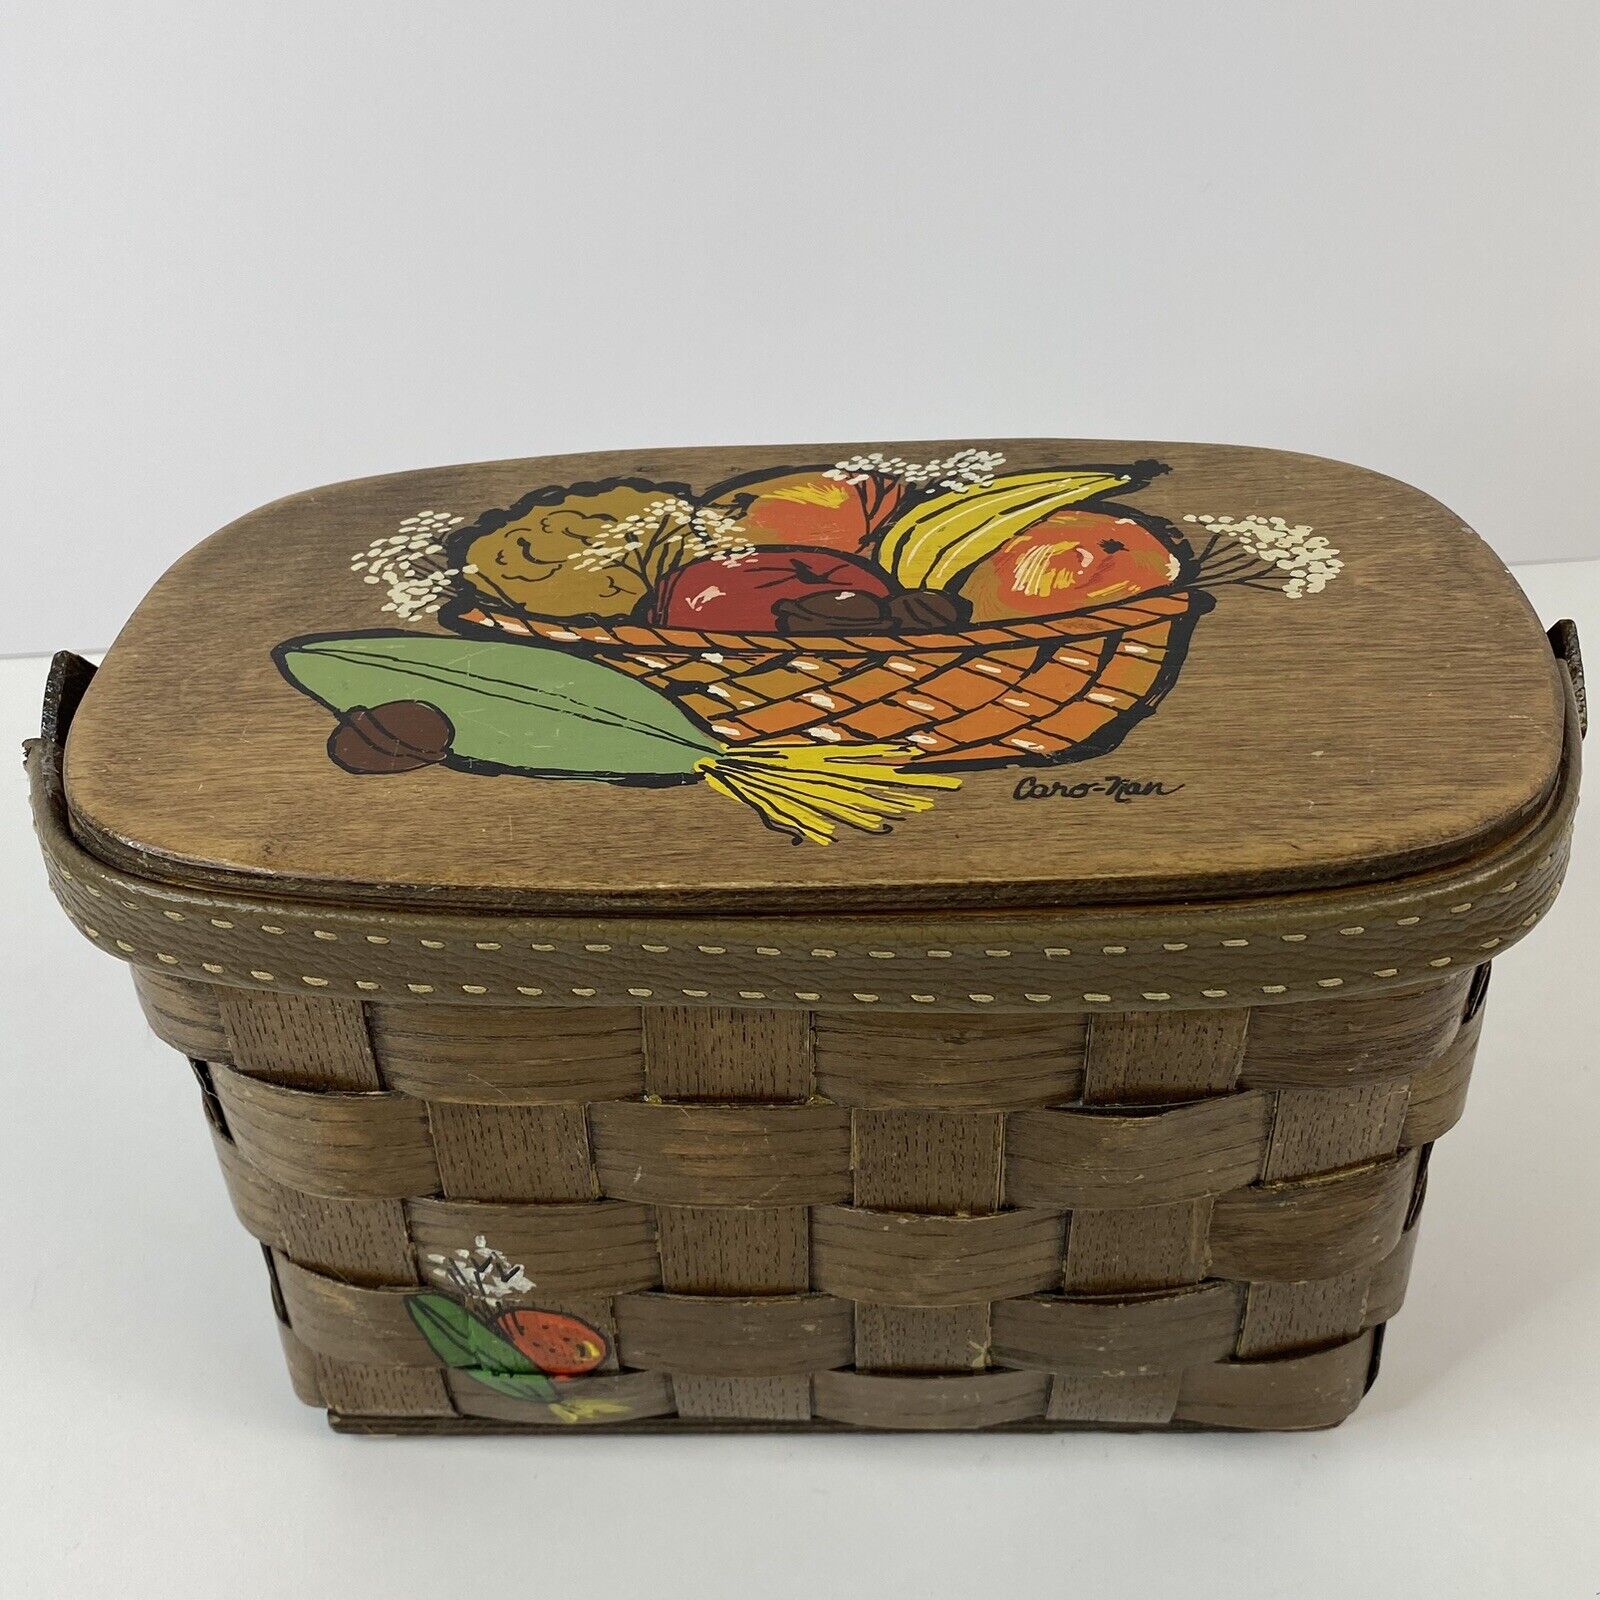 Handmade Wooden Basket with Handle & Lining Hand Painted Artist Signed 6.5” Tall